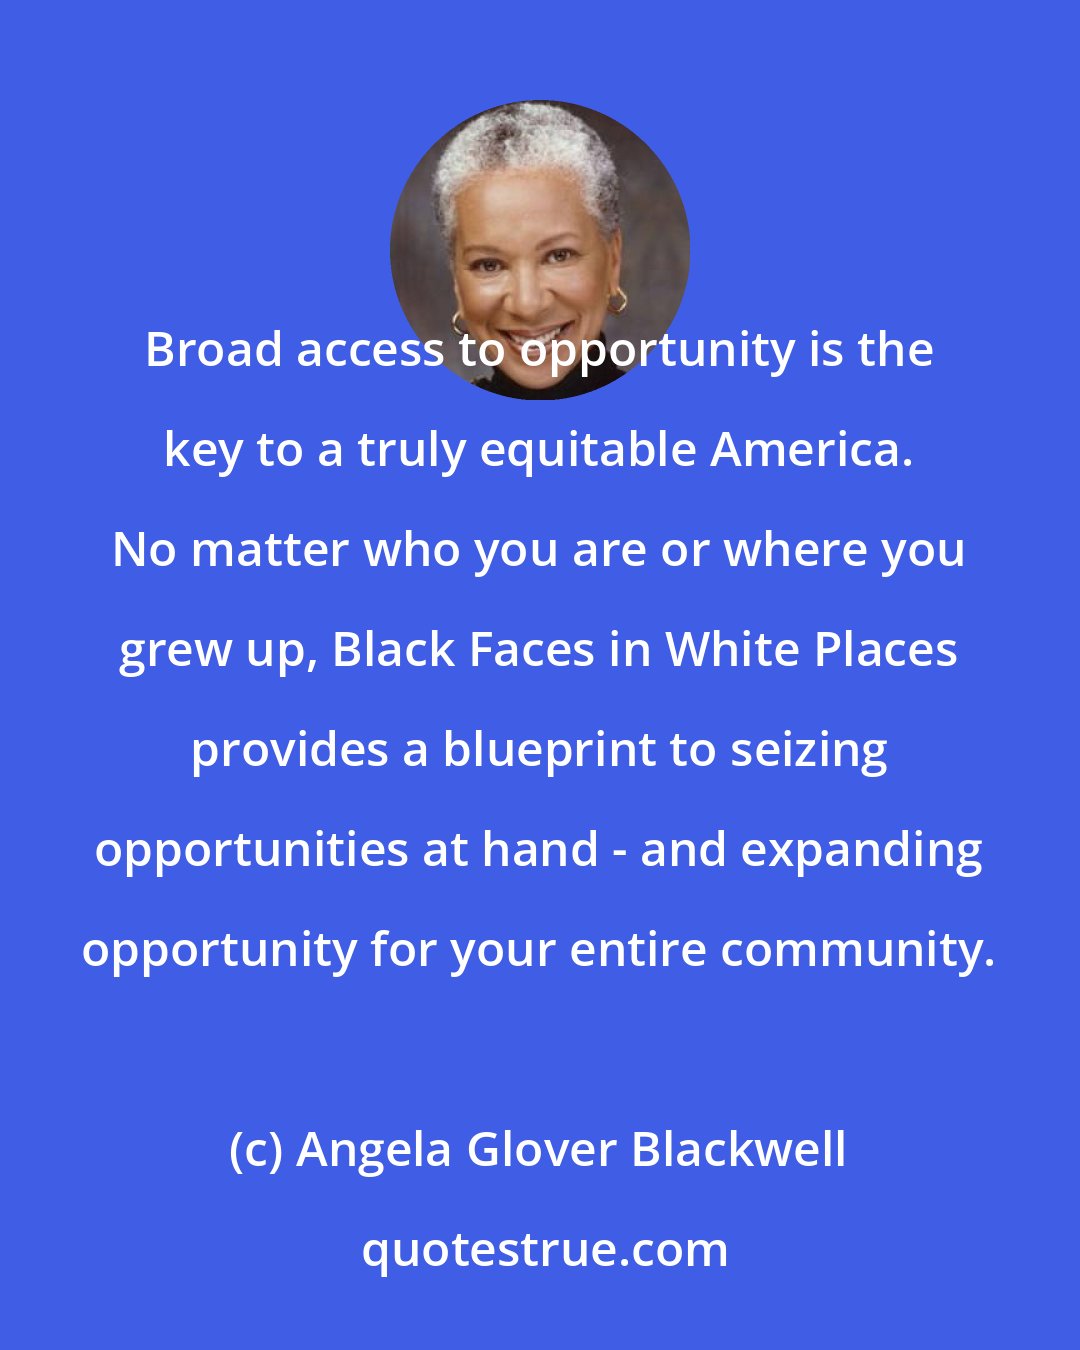 Angela Glover Blackwell: Broad access to opportunity is the key to a truly equitable America. No matter who you are or where you grew up, Black Faces in White Places provides a blueprint to seizing opportunities at hand - and expanding opportunity for your entire community.